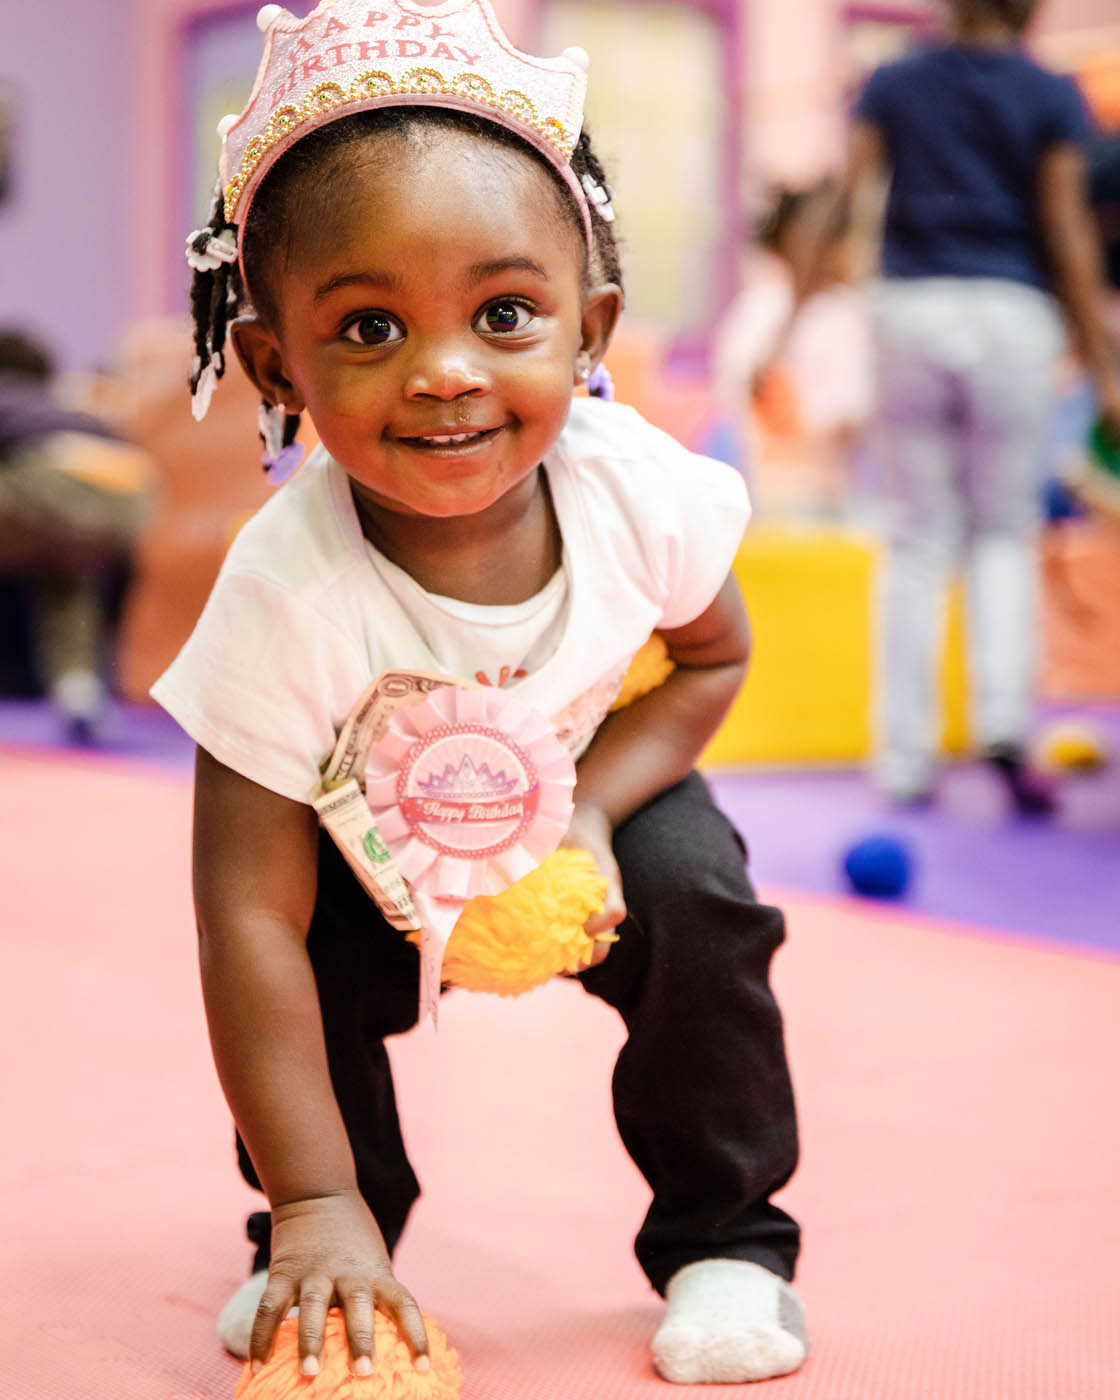 A toddler in a white shirt smiling at the camera, contact us today for toddler activities in Glen Allen.